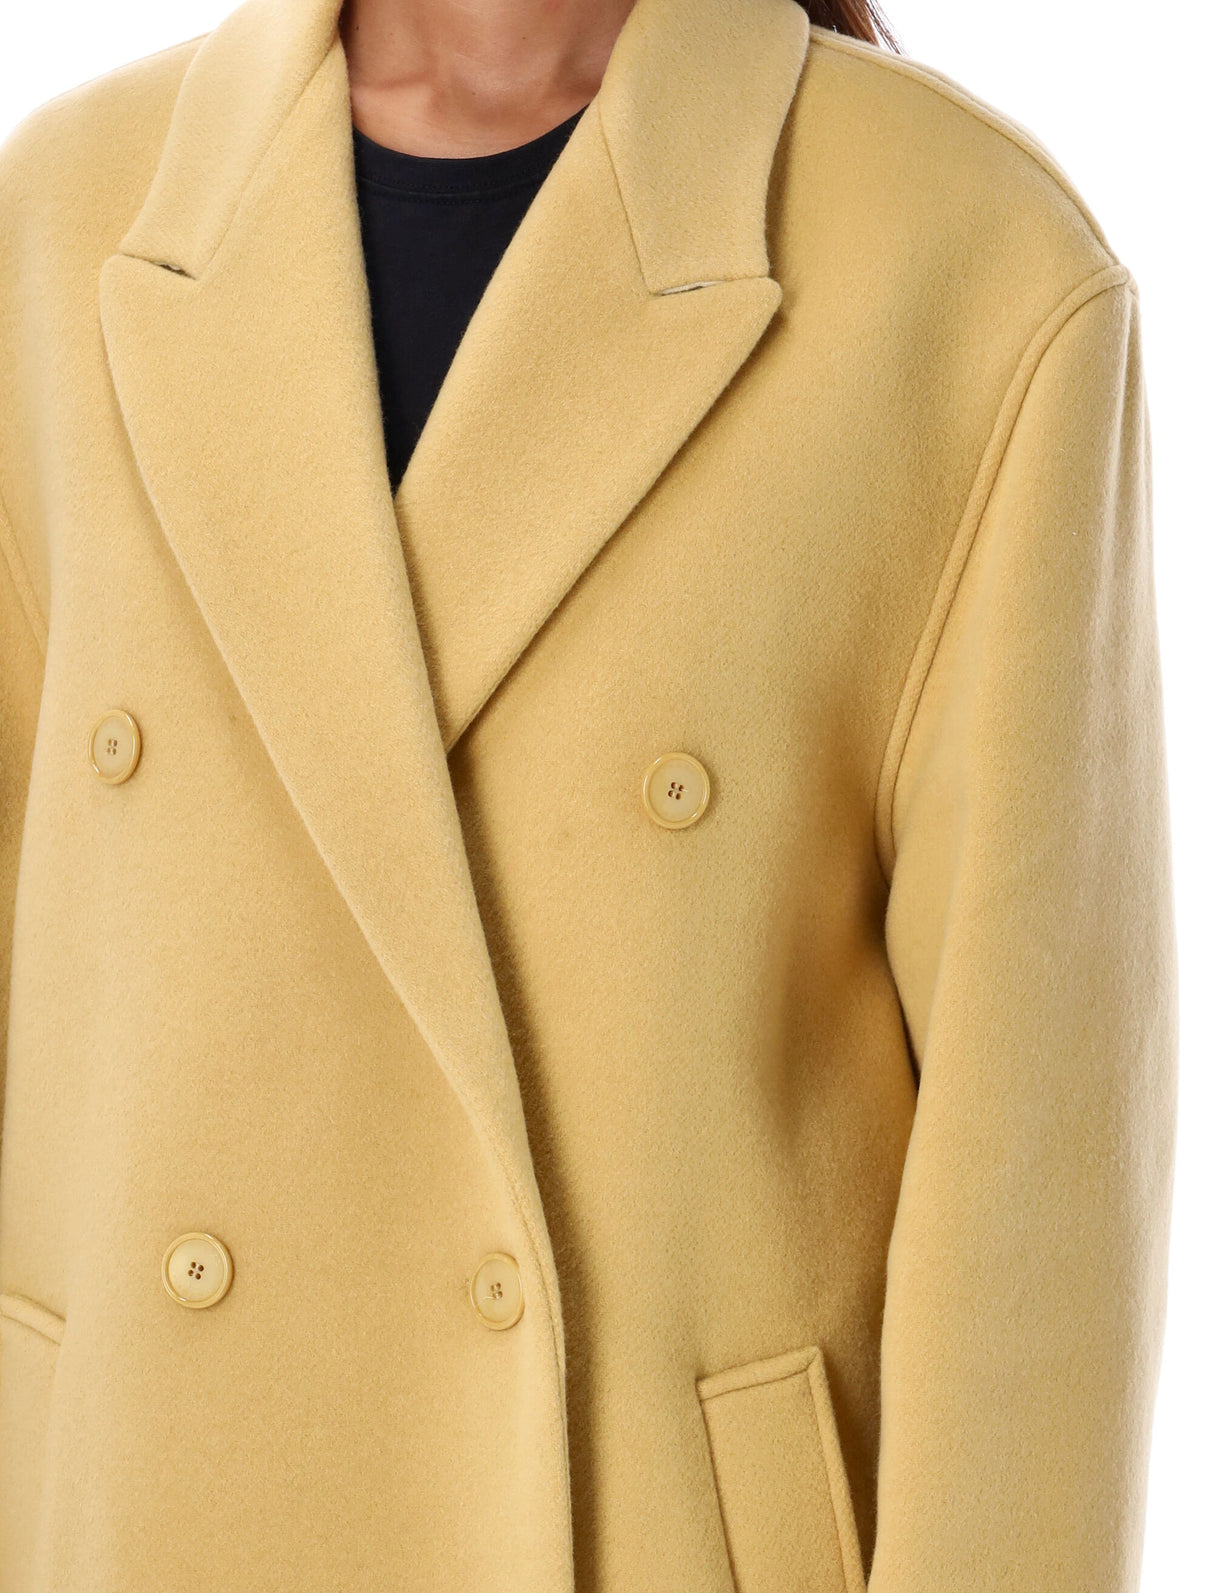 Theodore Wool Blend Jacket in Straw Yellow - Knee-Length V-Neck Outerwear for Women